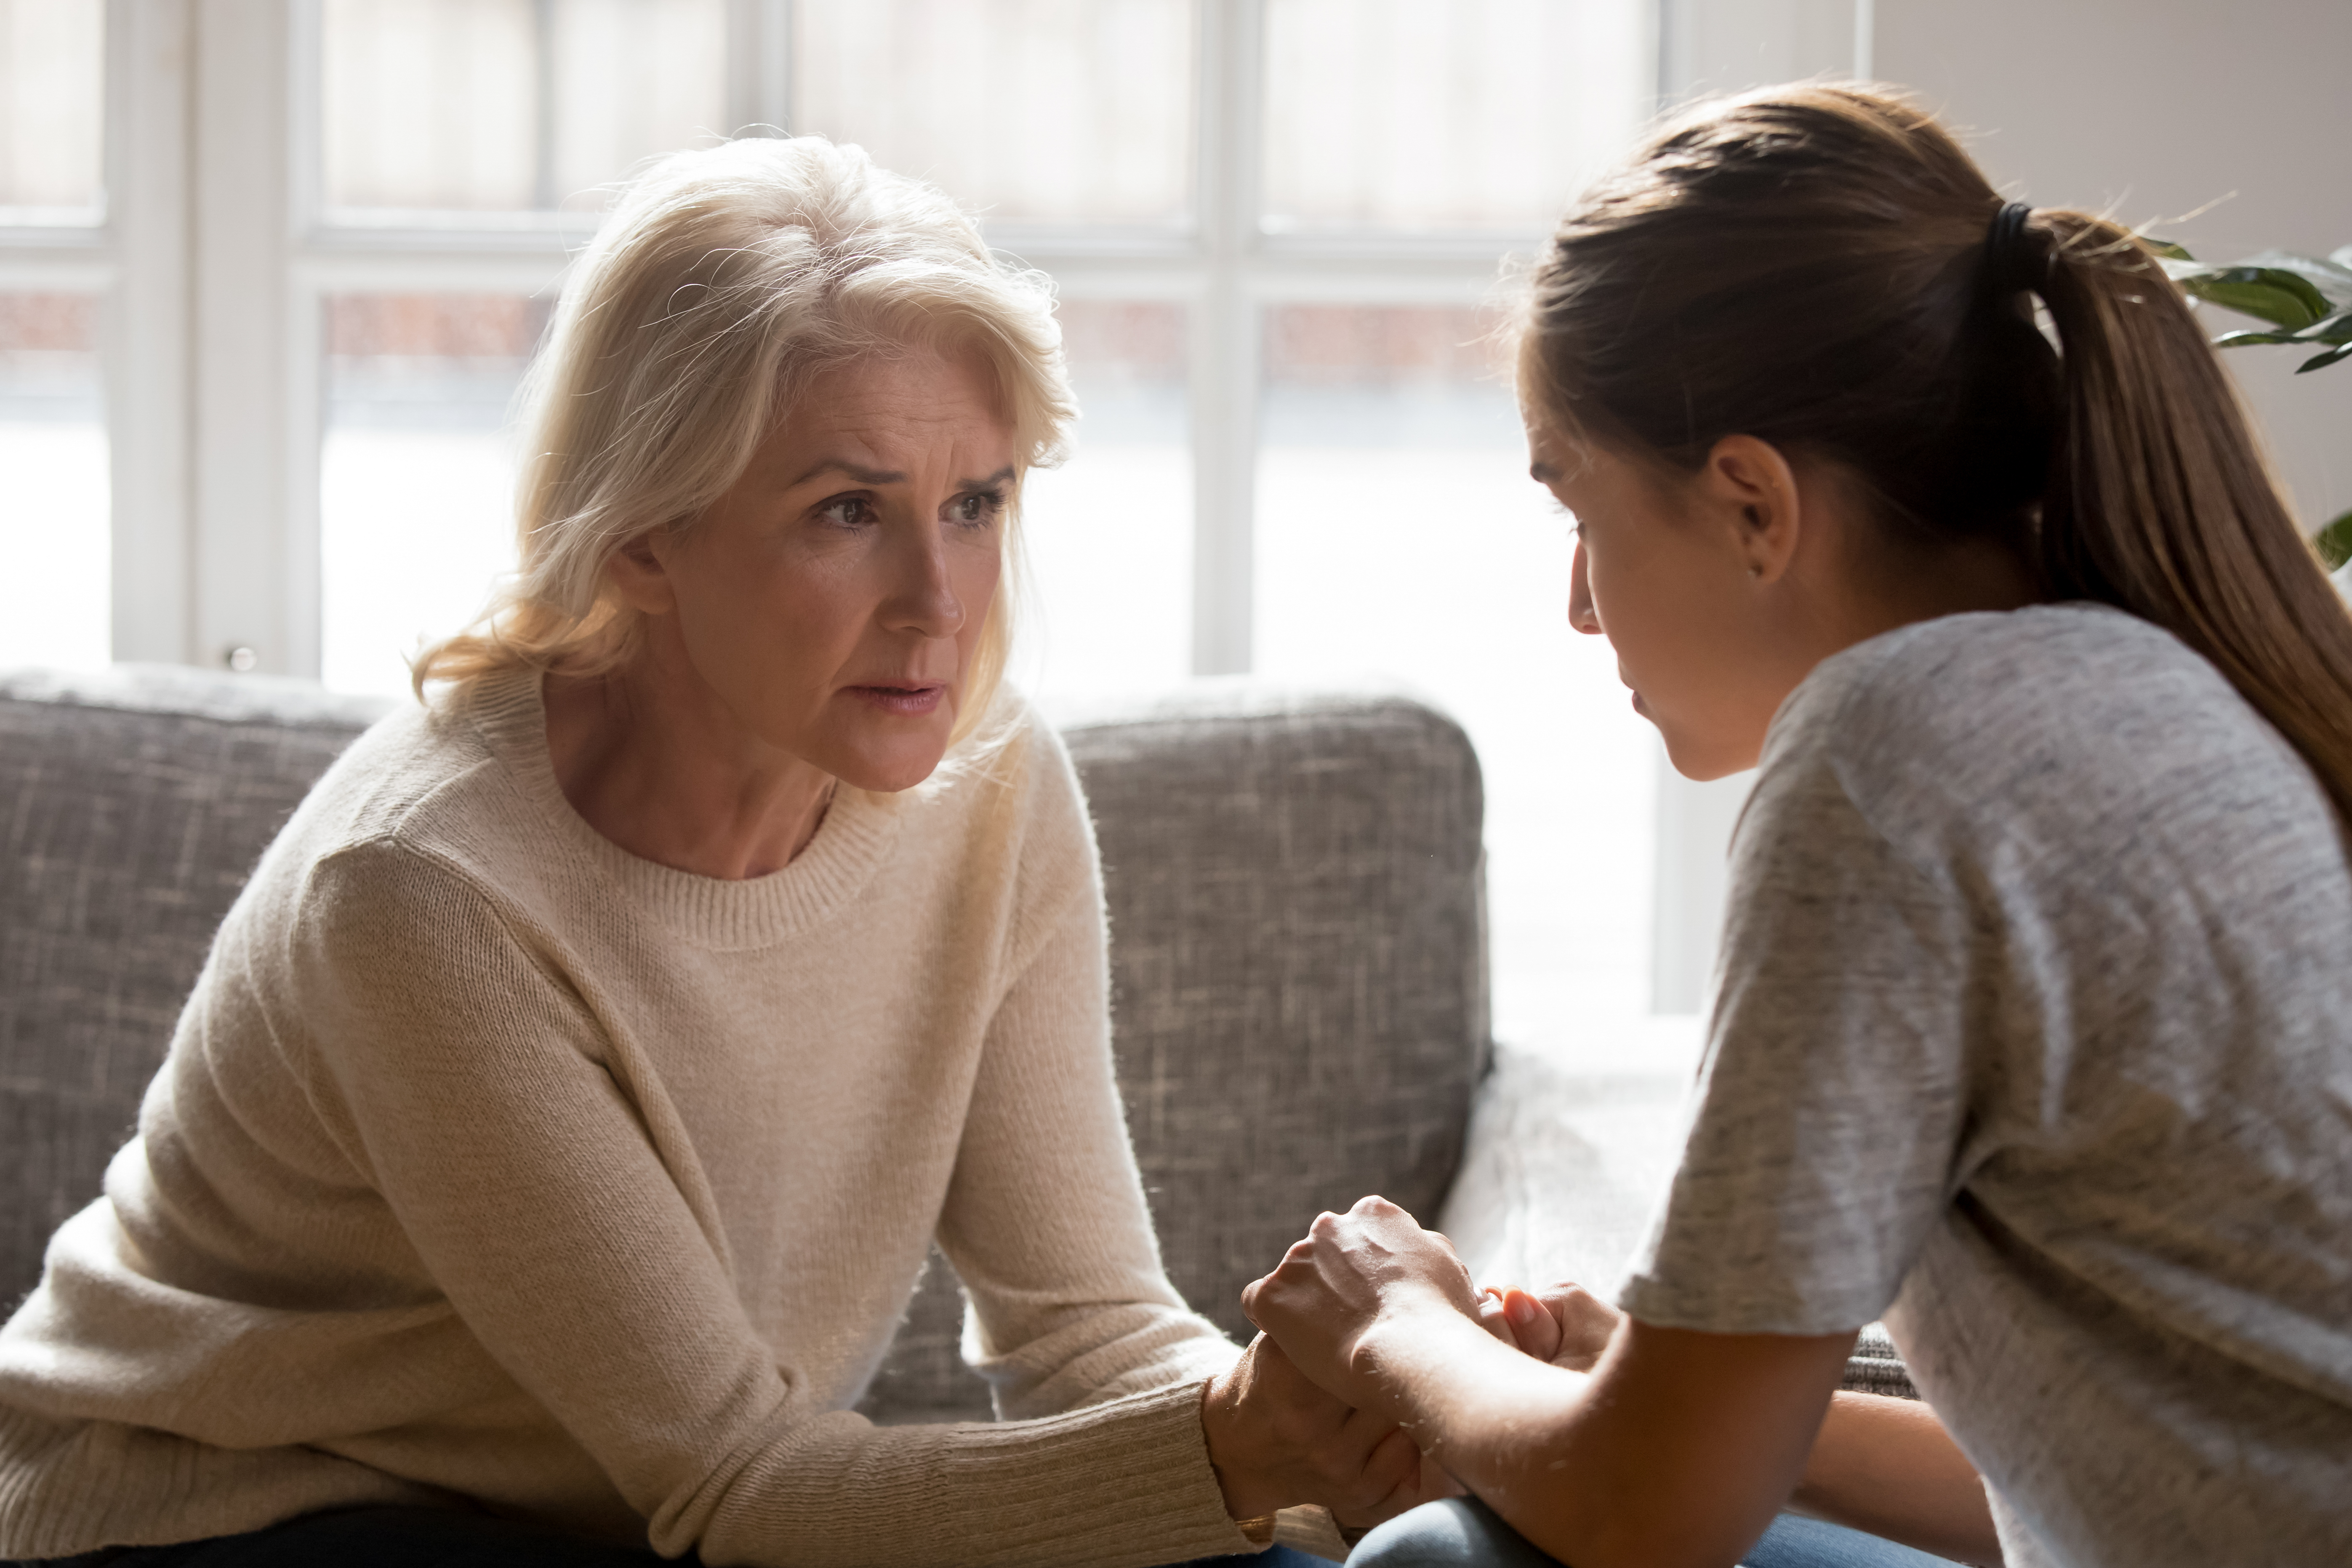 An older woman having a serious conversation with a younger woman | Source: Shutterstock